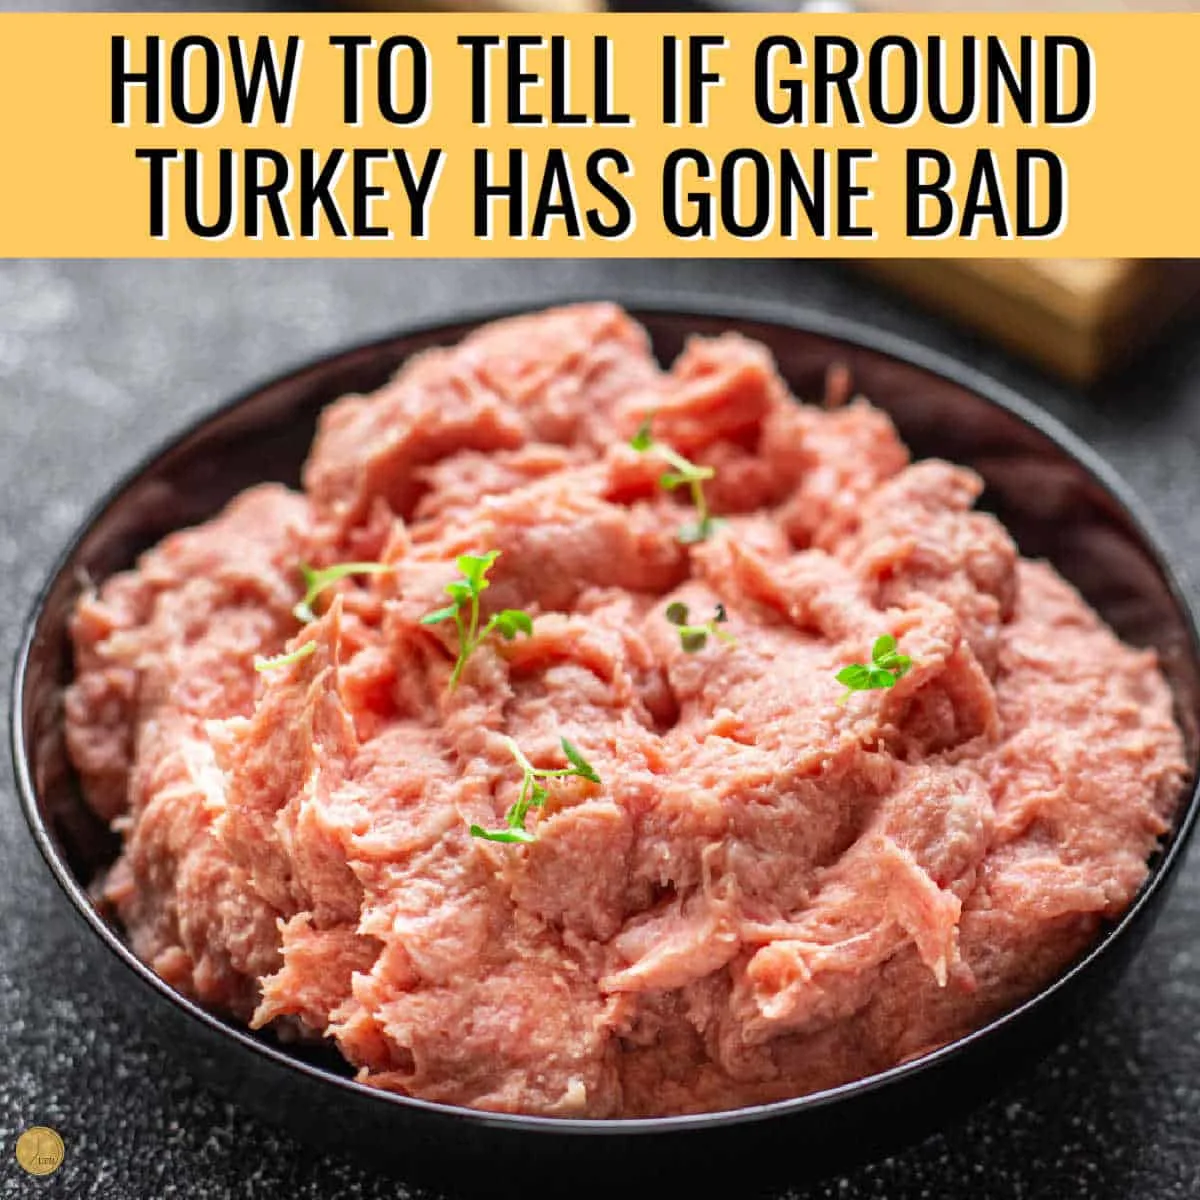 ground turkey in a black bowl with yellow strip and black text "how to tell if ground turkey has gone bad"